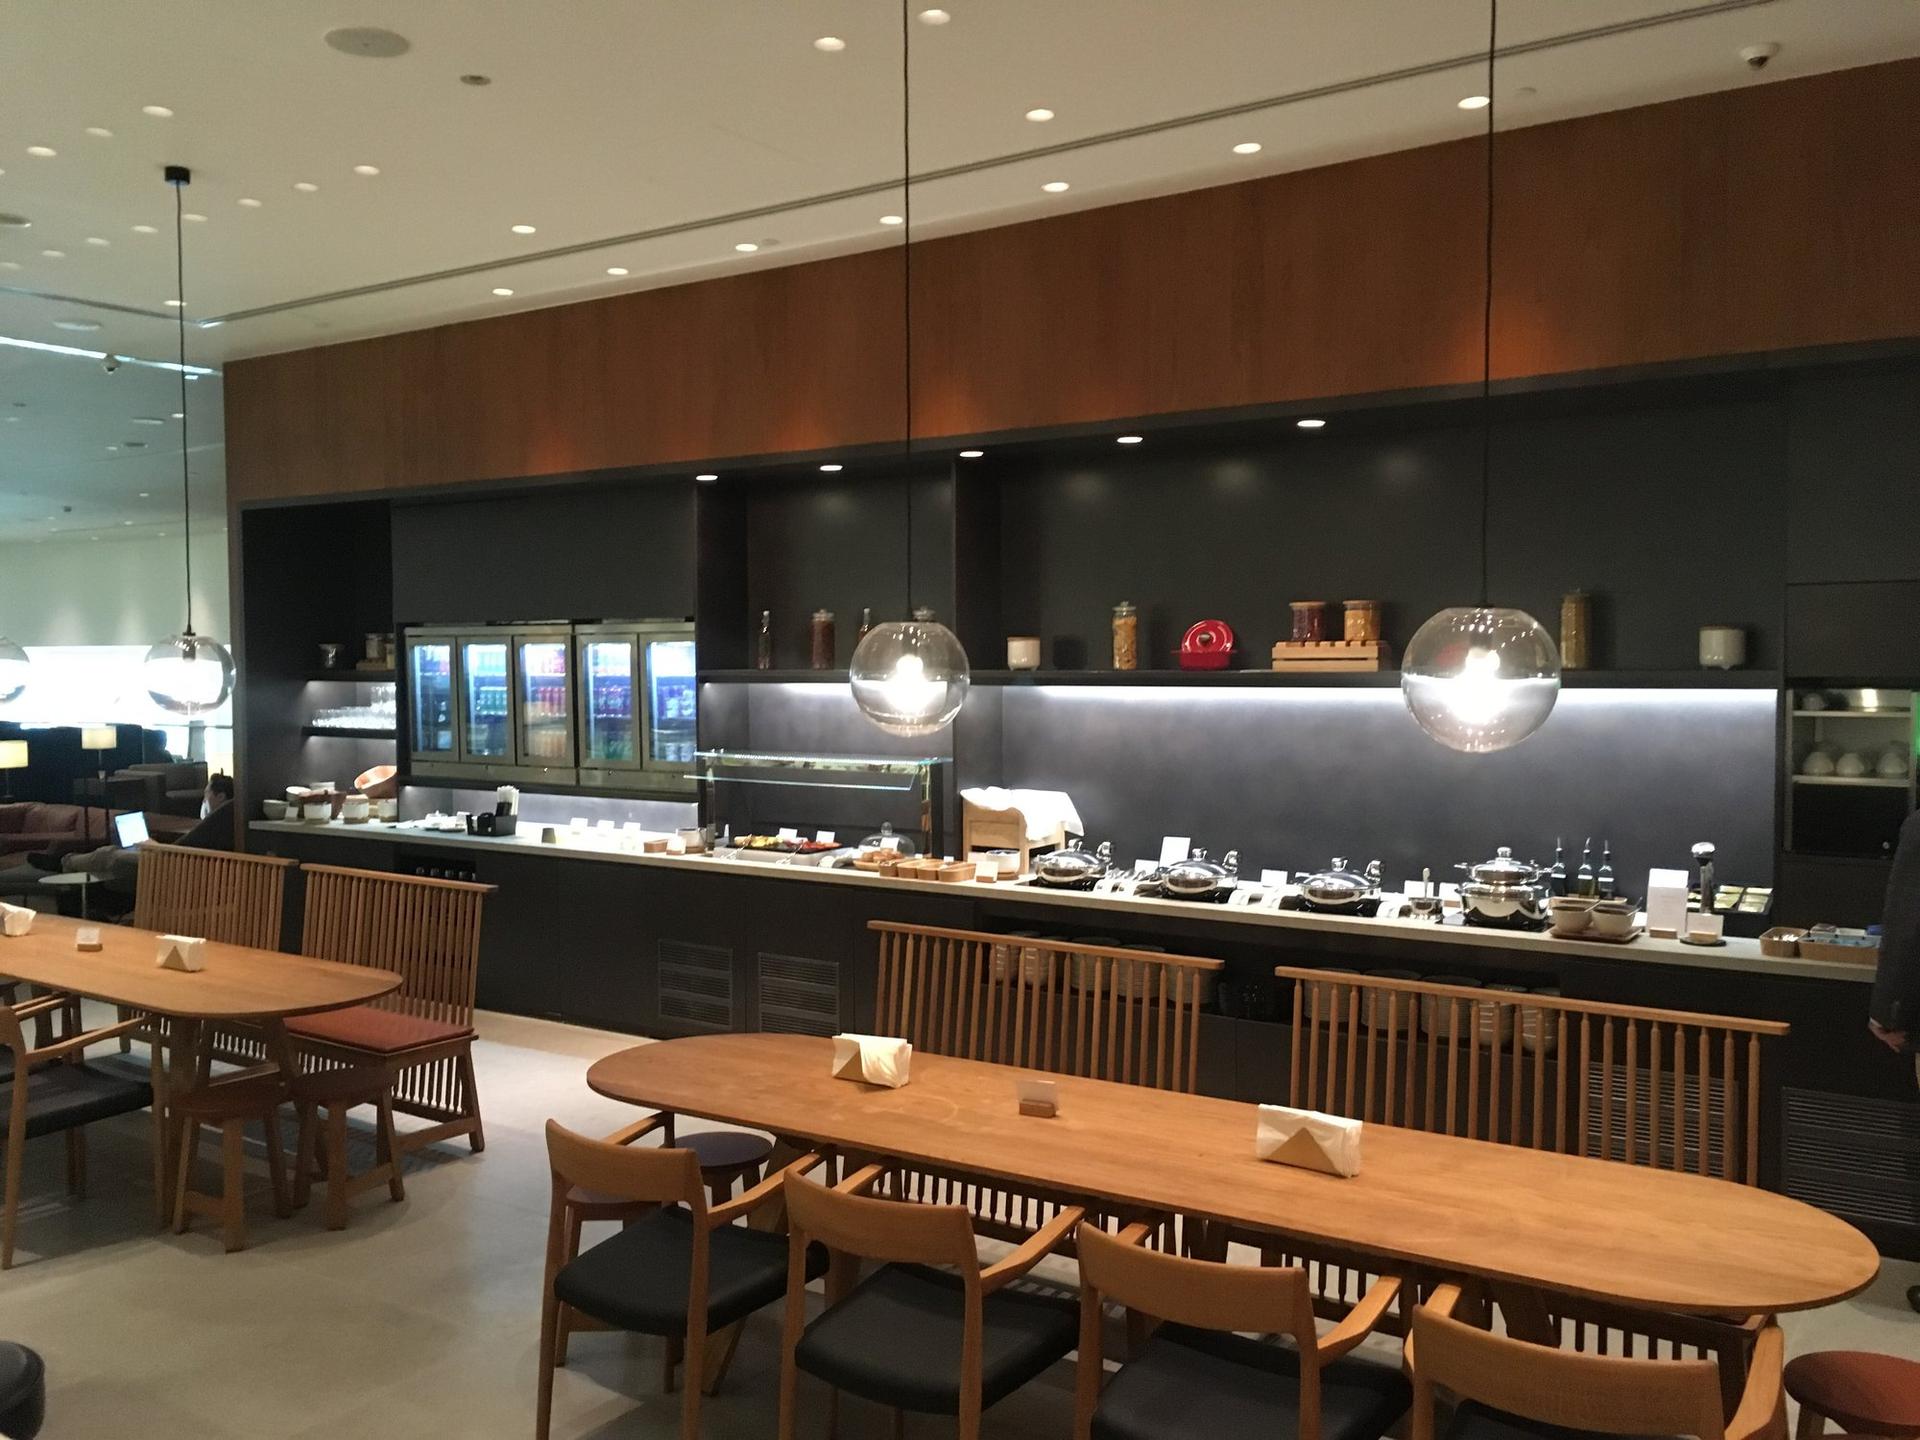 Cathay Pacific Lounge image 5 of 60